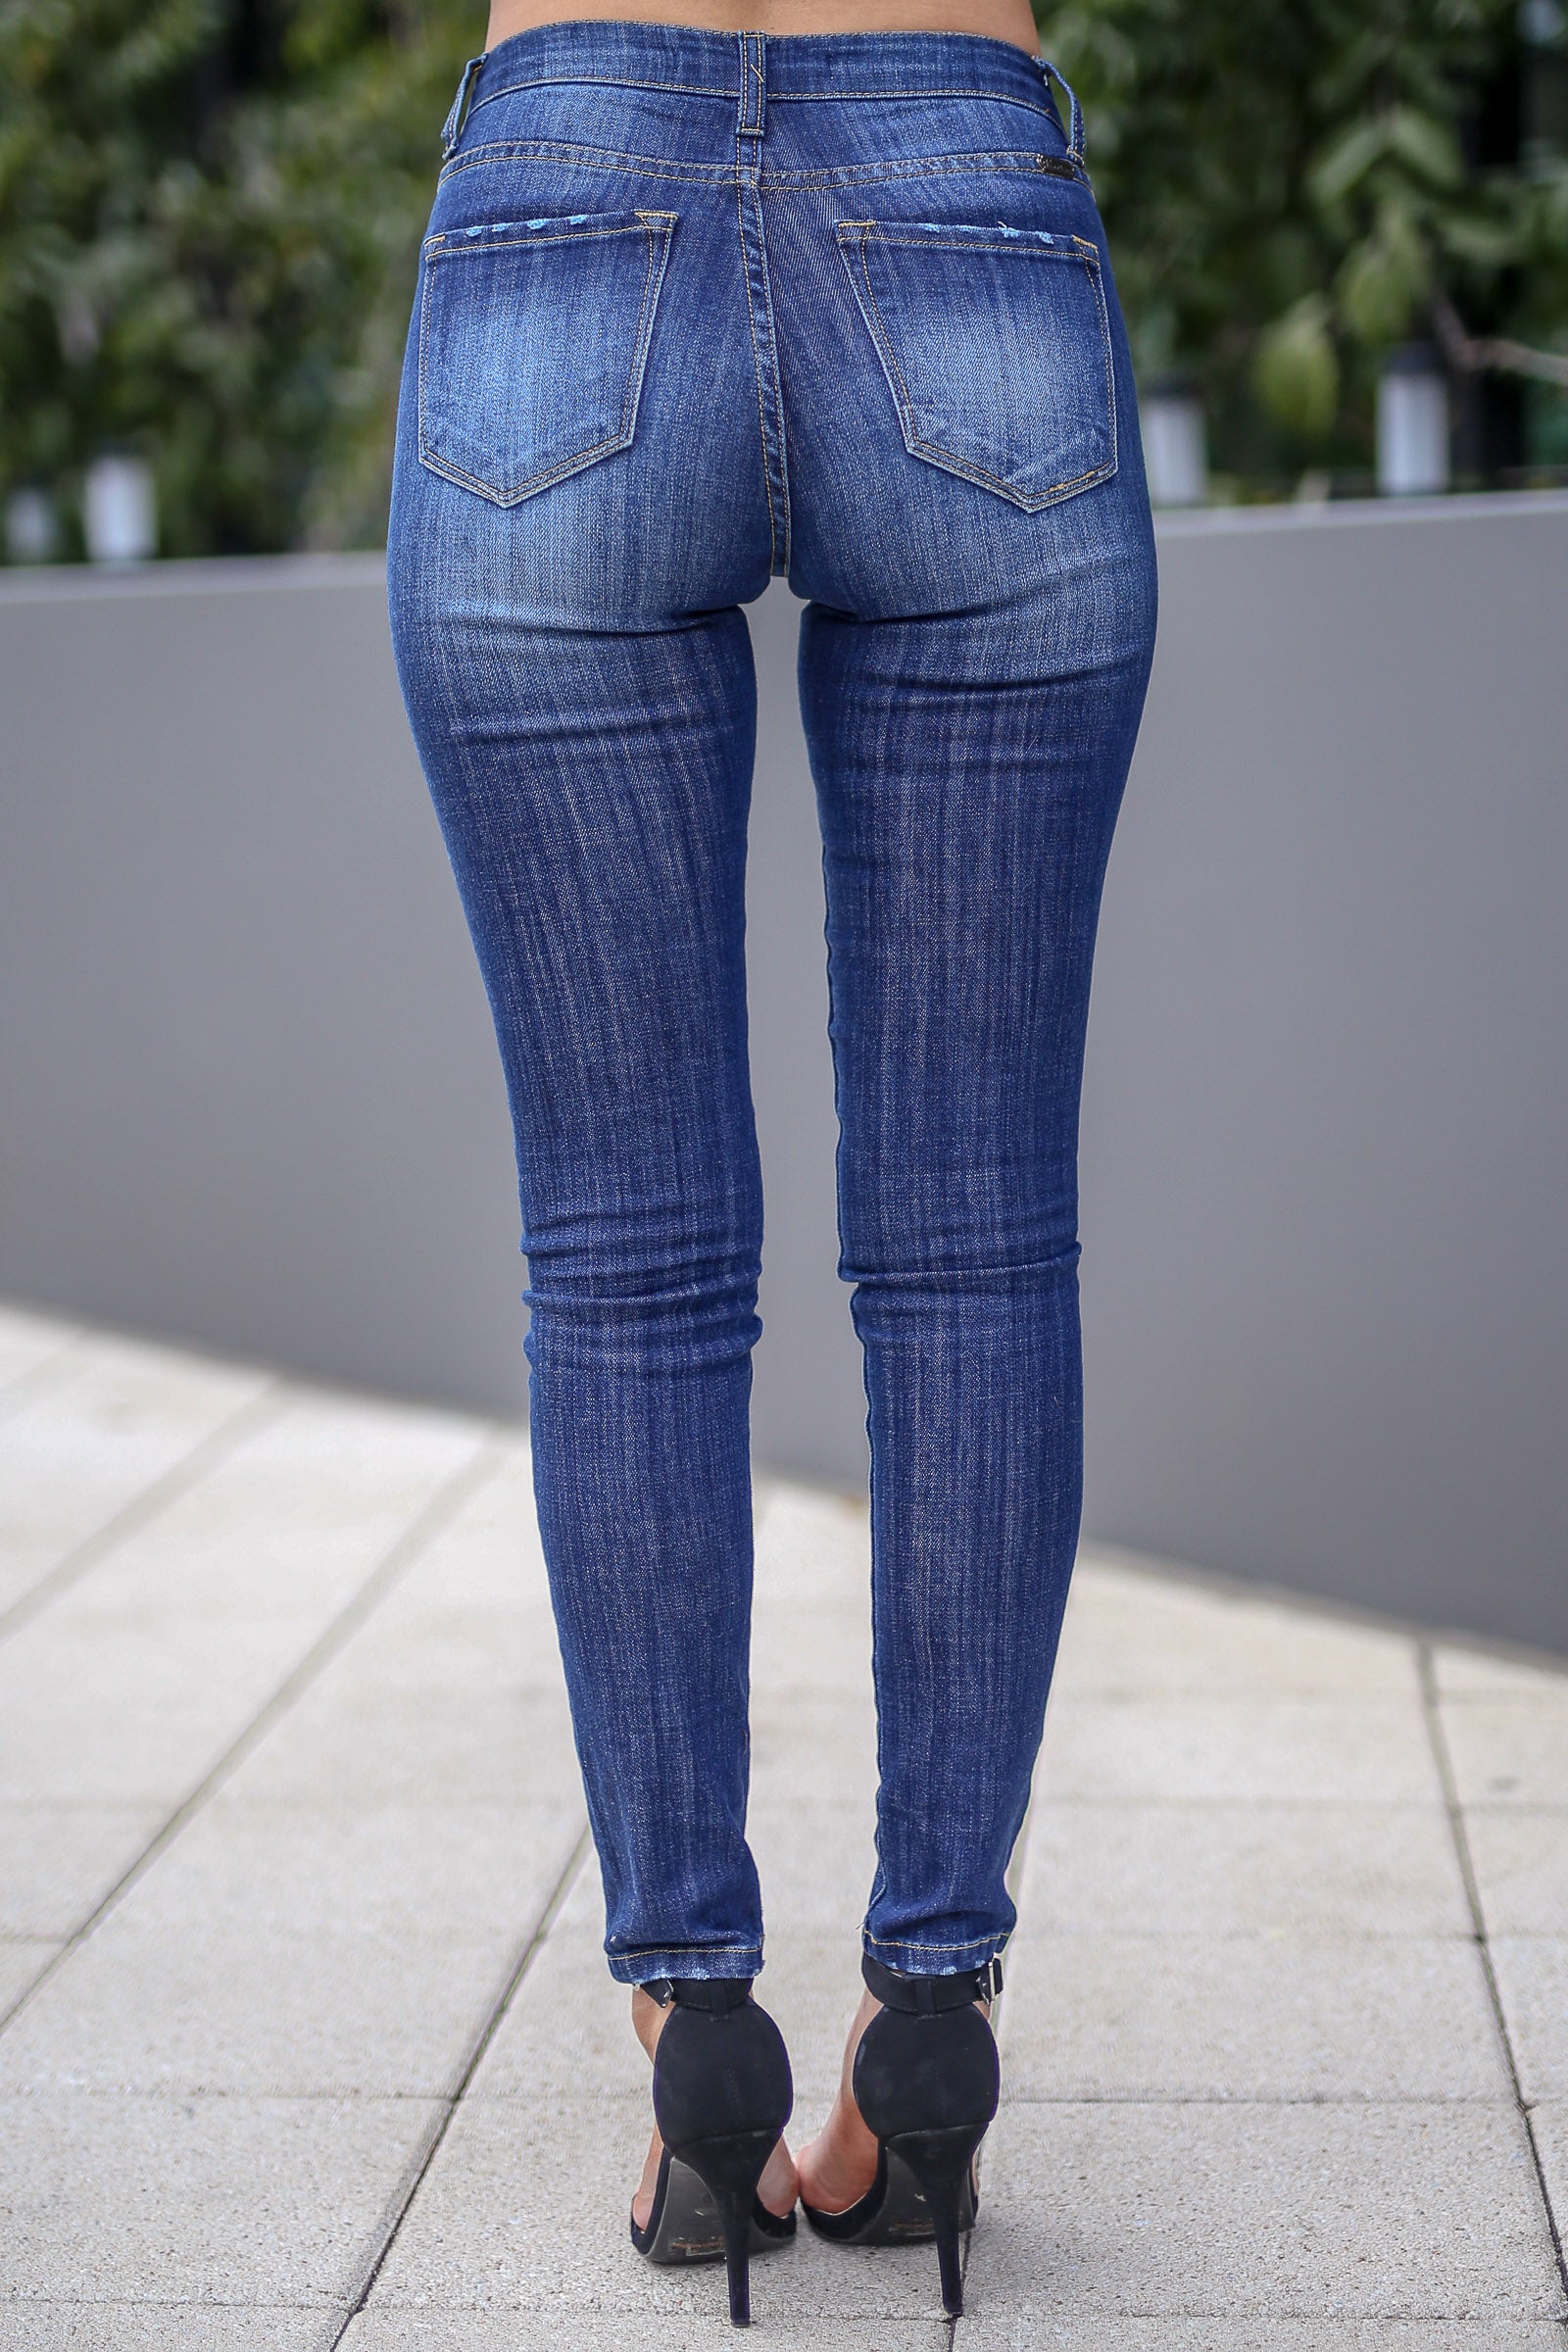 rommel moord is er KAN CAN Classic Skinny Jeans - Rachel Wash - Closet Candy Boutique